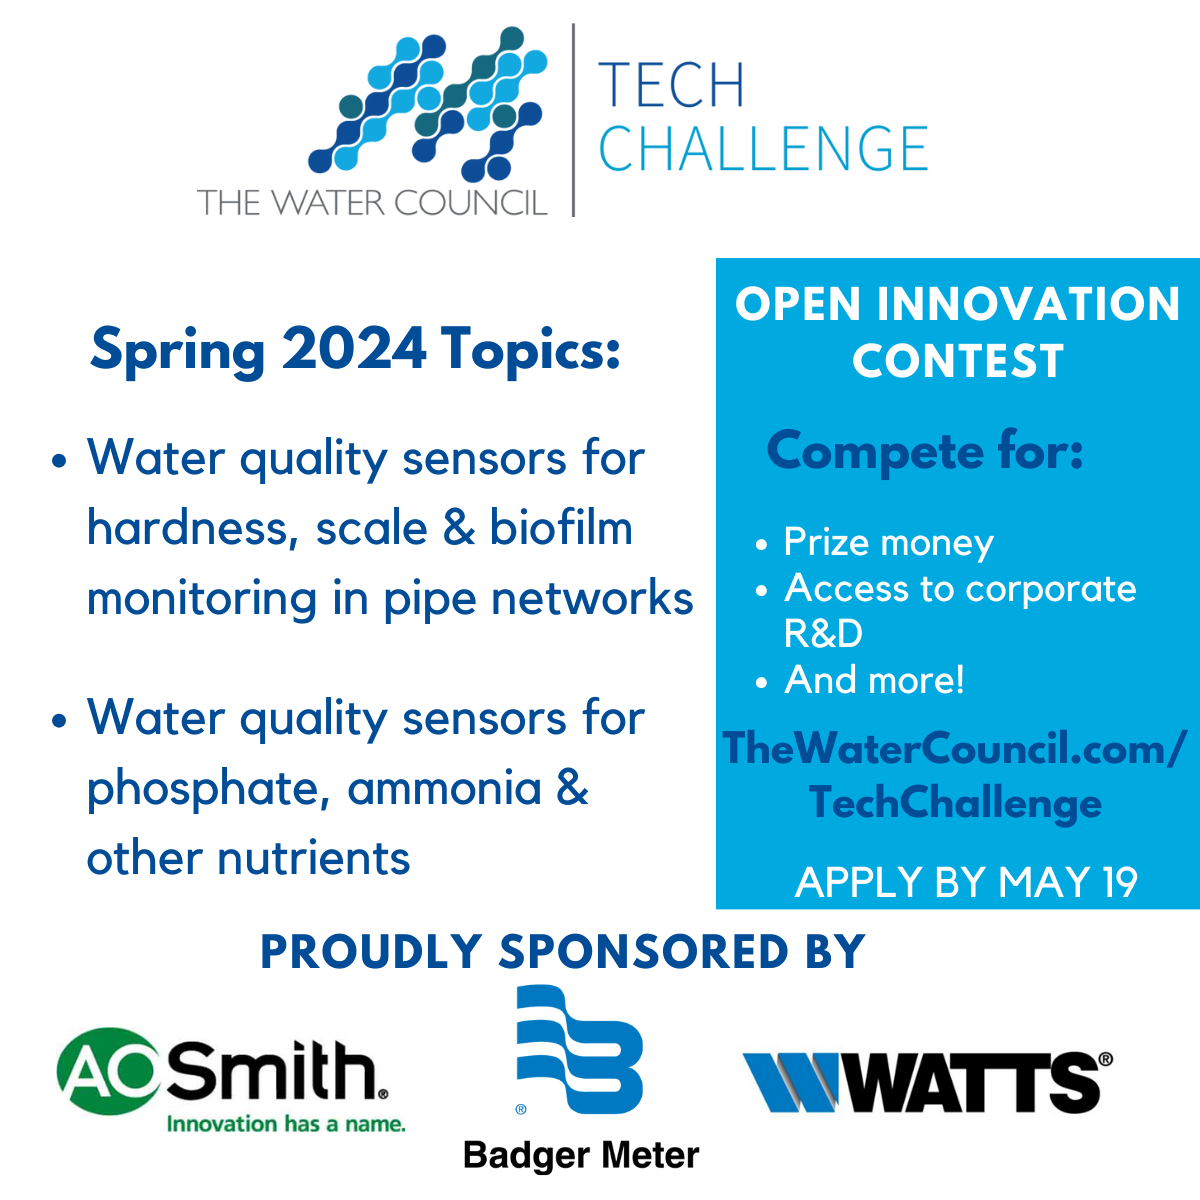 Seeking sensor solutions! Do you have a water quality sensor to detect phosphorus or hardness in water? If so, please consider applying to our c...